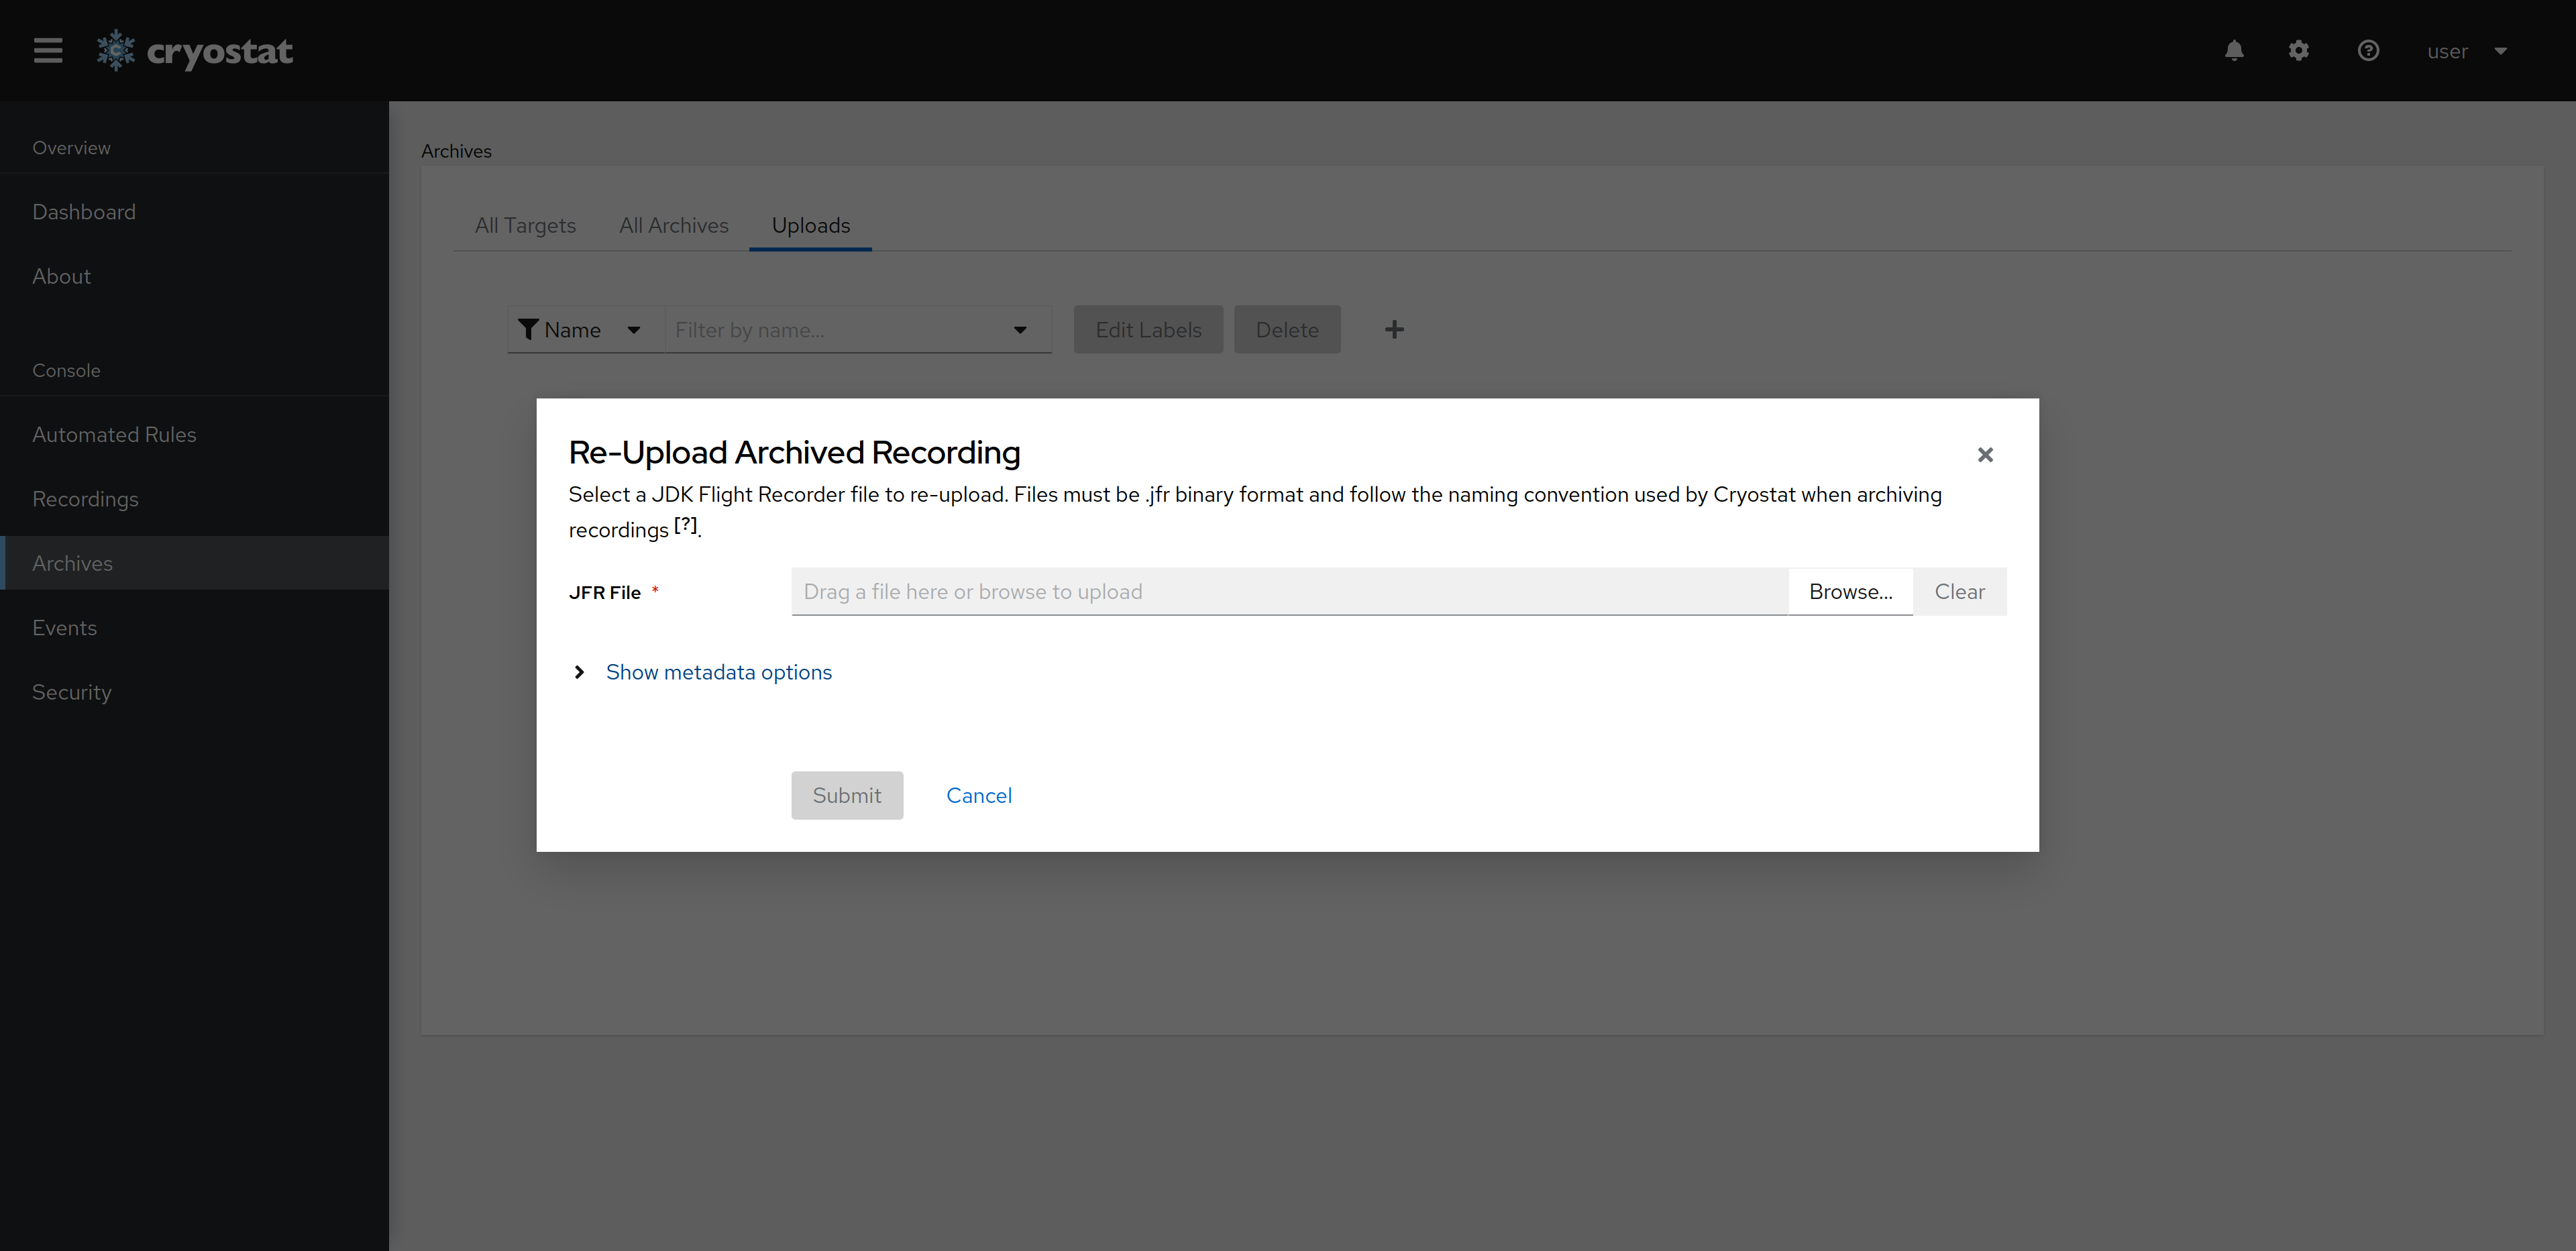 Select the Recording to Upload